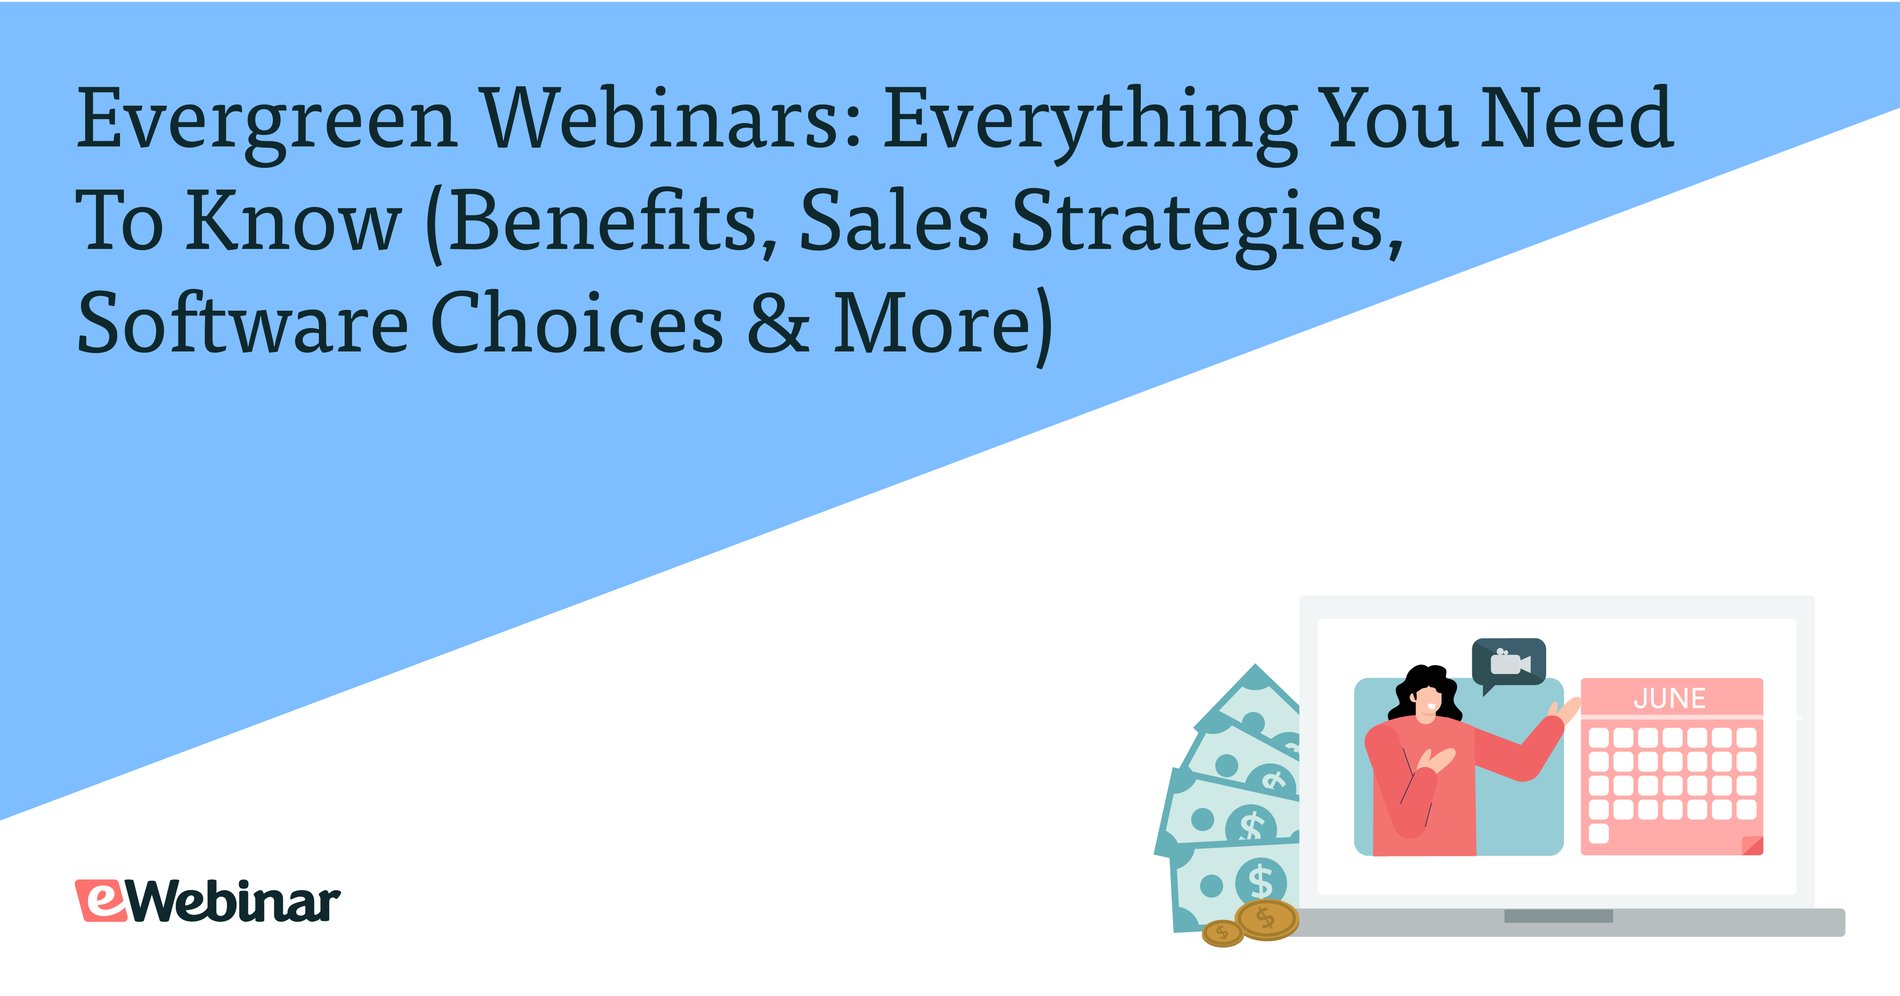 Evergreen Webinars: Everything You Need to Know (Benefits, Sales Strategies, Software Choices and More!)